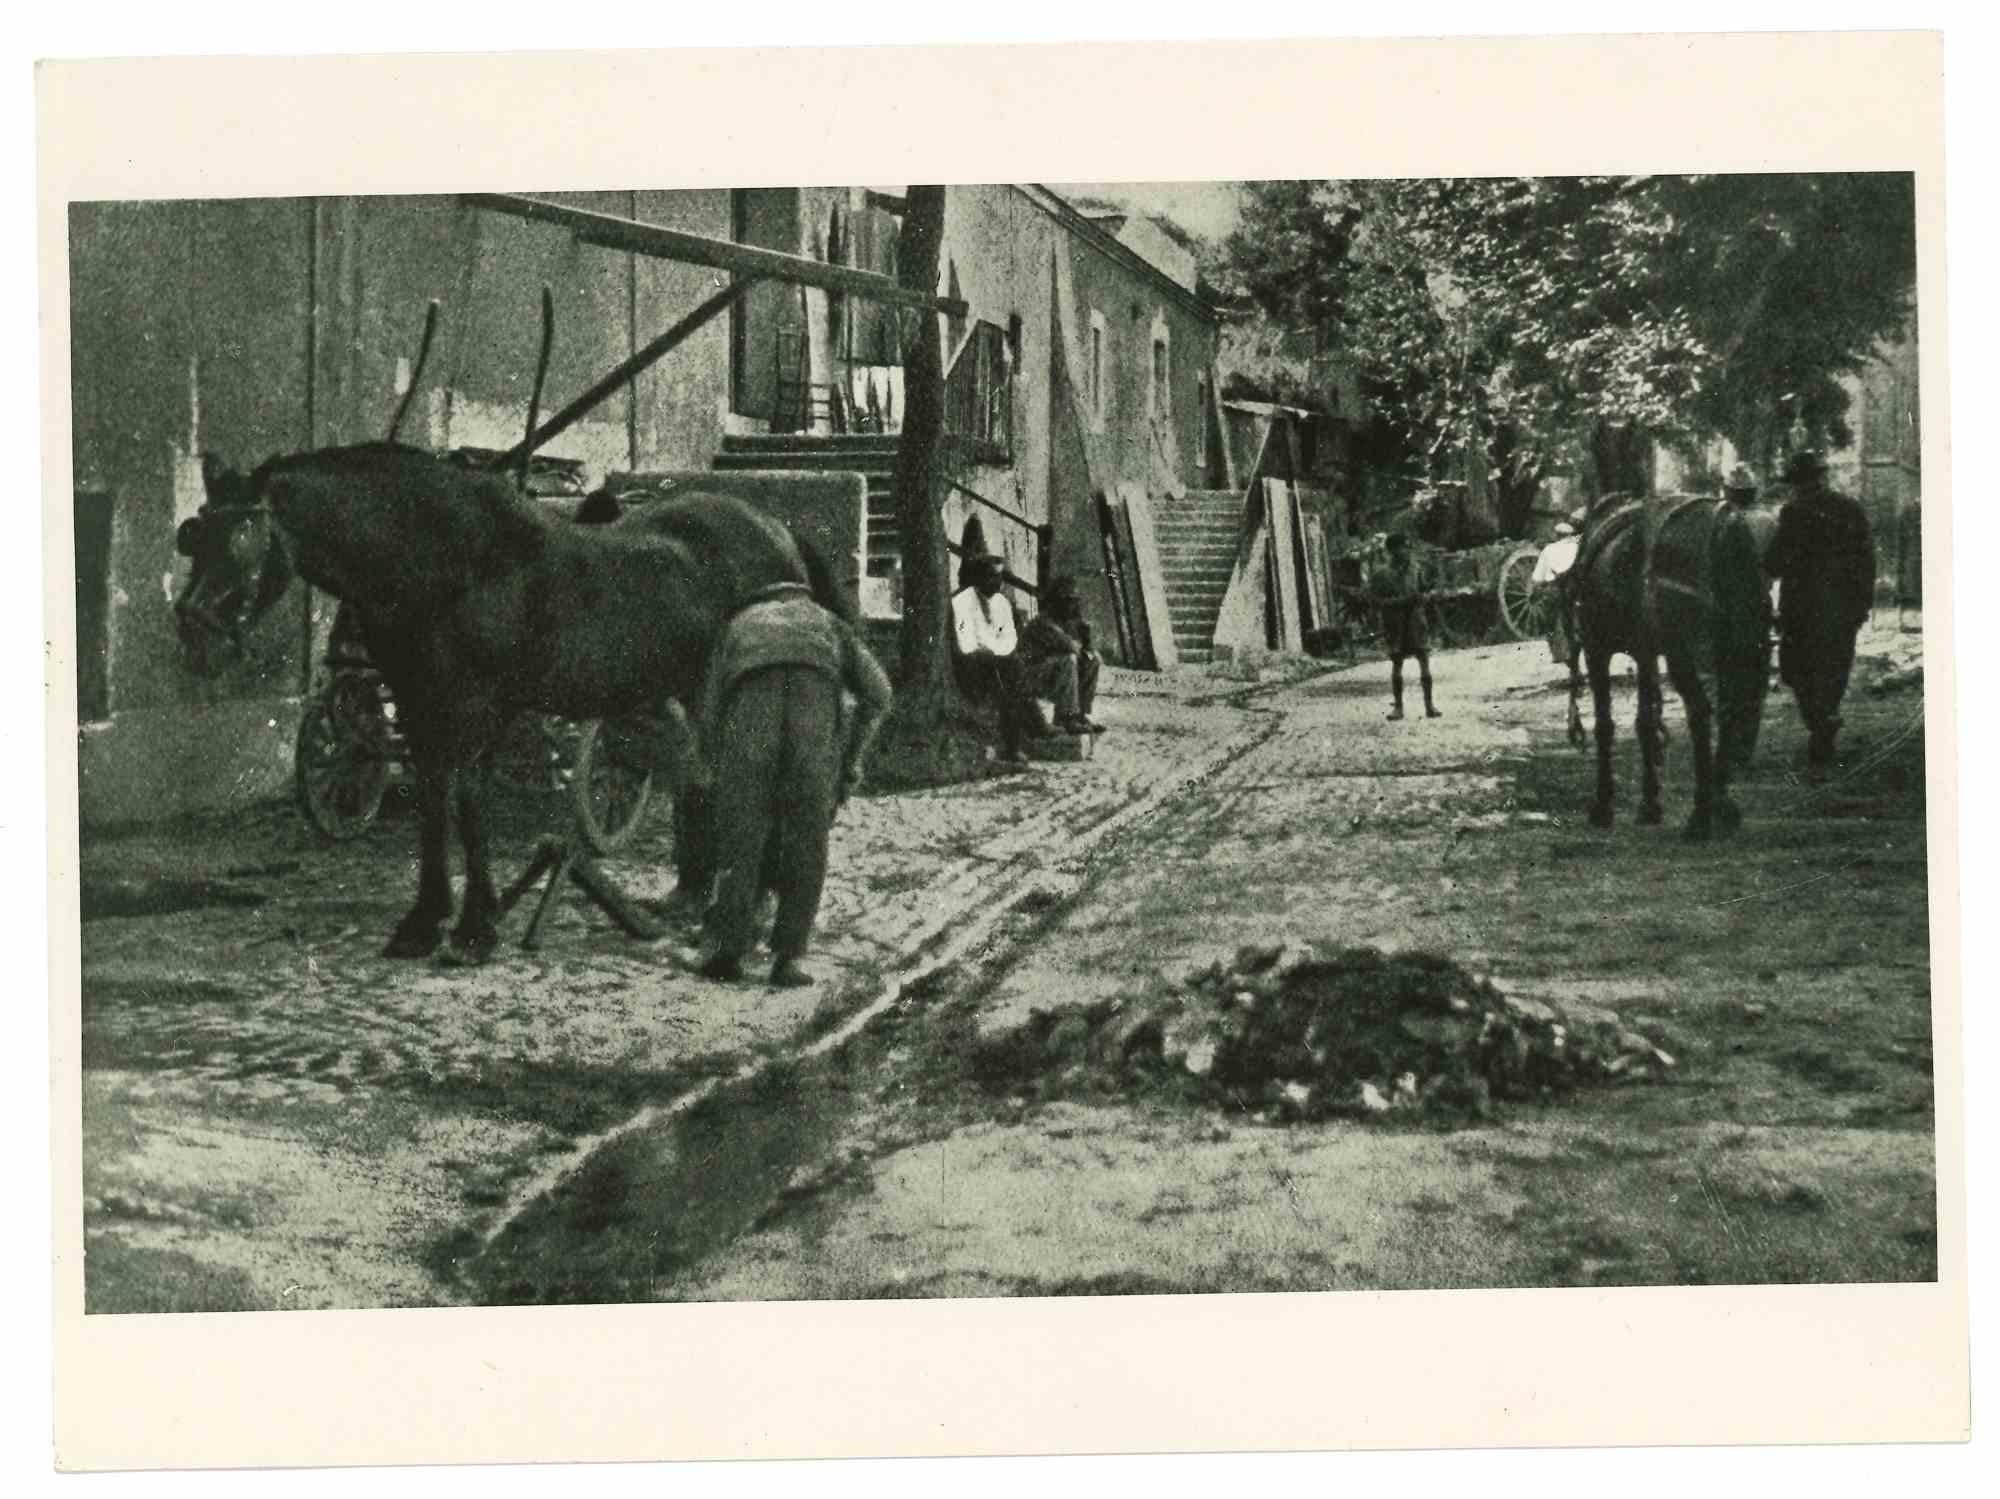 Unknown Landscape Photograph - Country Life Of Rome - Vintage Photograph - Early 20th Century